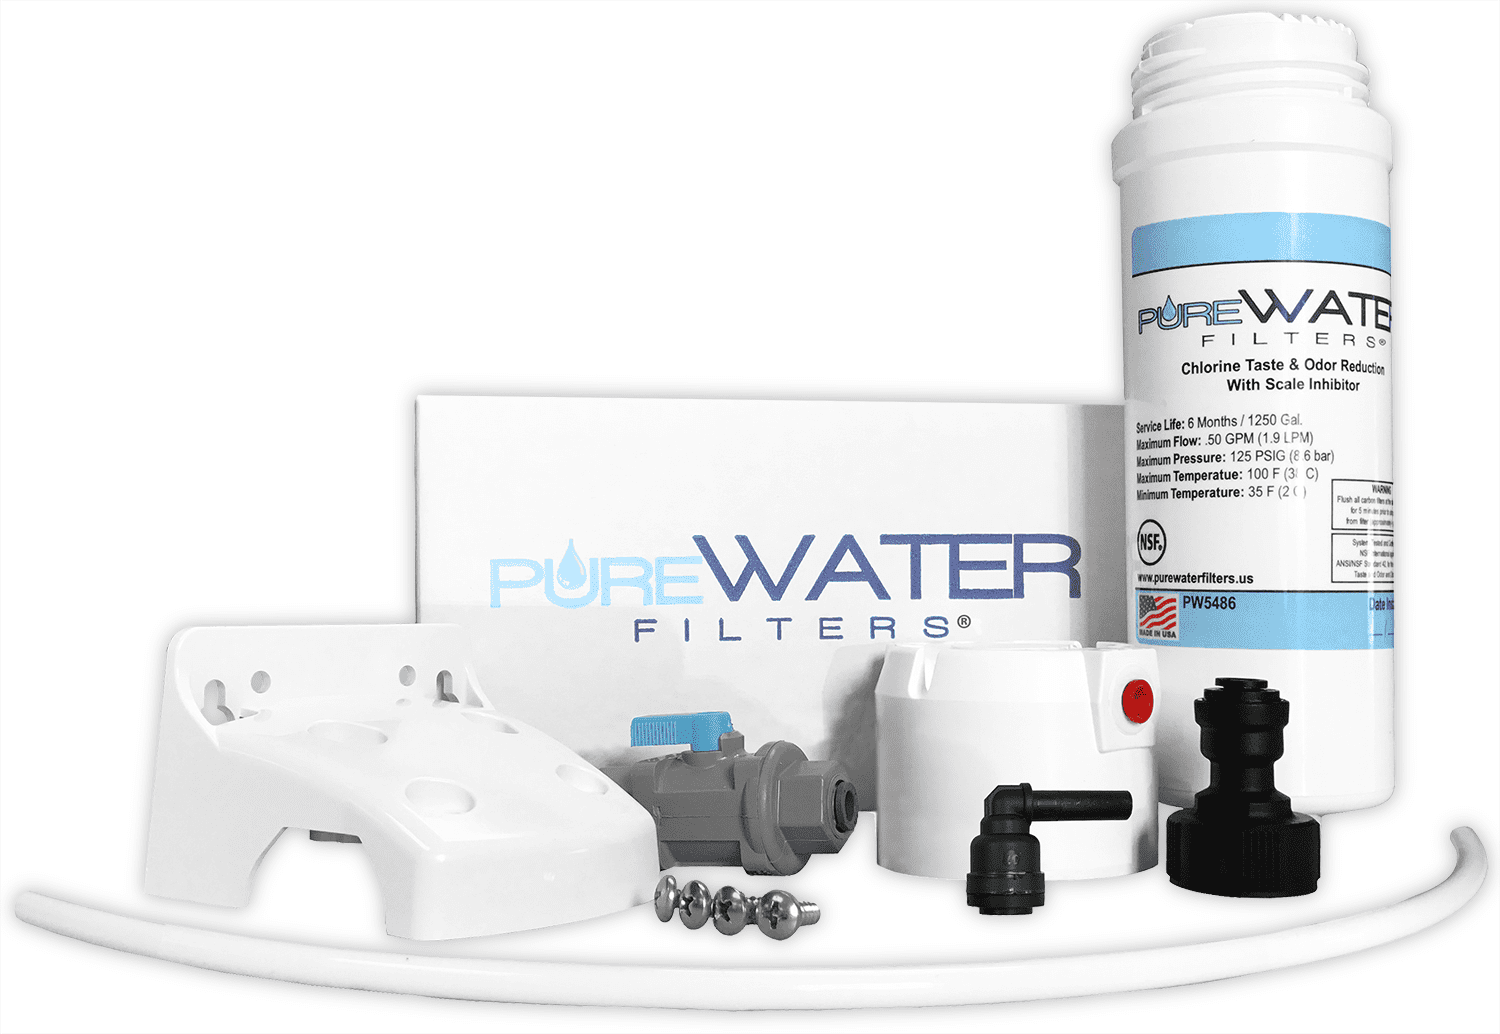 PureWater Filters Keurig KQ8 Q5486 KQ8A Water Filter Kit for B150, B150P, K150, K150P, B155, K155, K3000, K3000SE, B3000, B3000SE